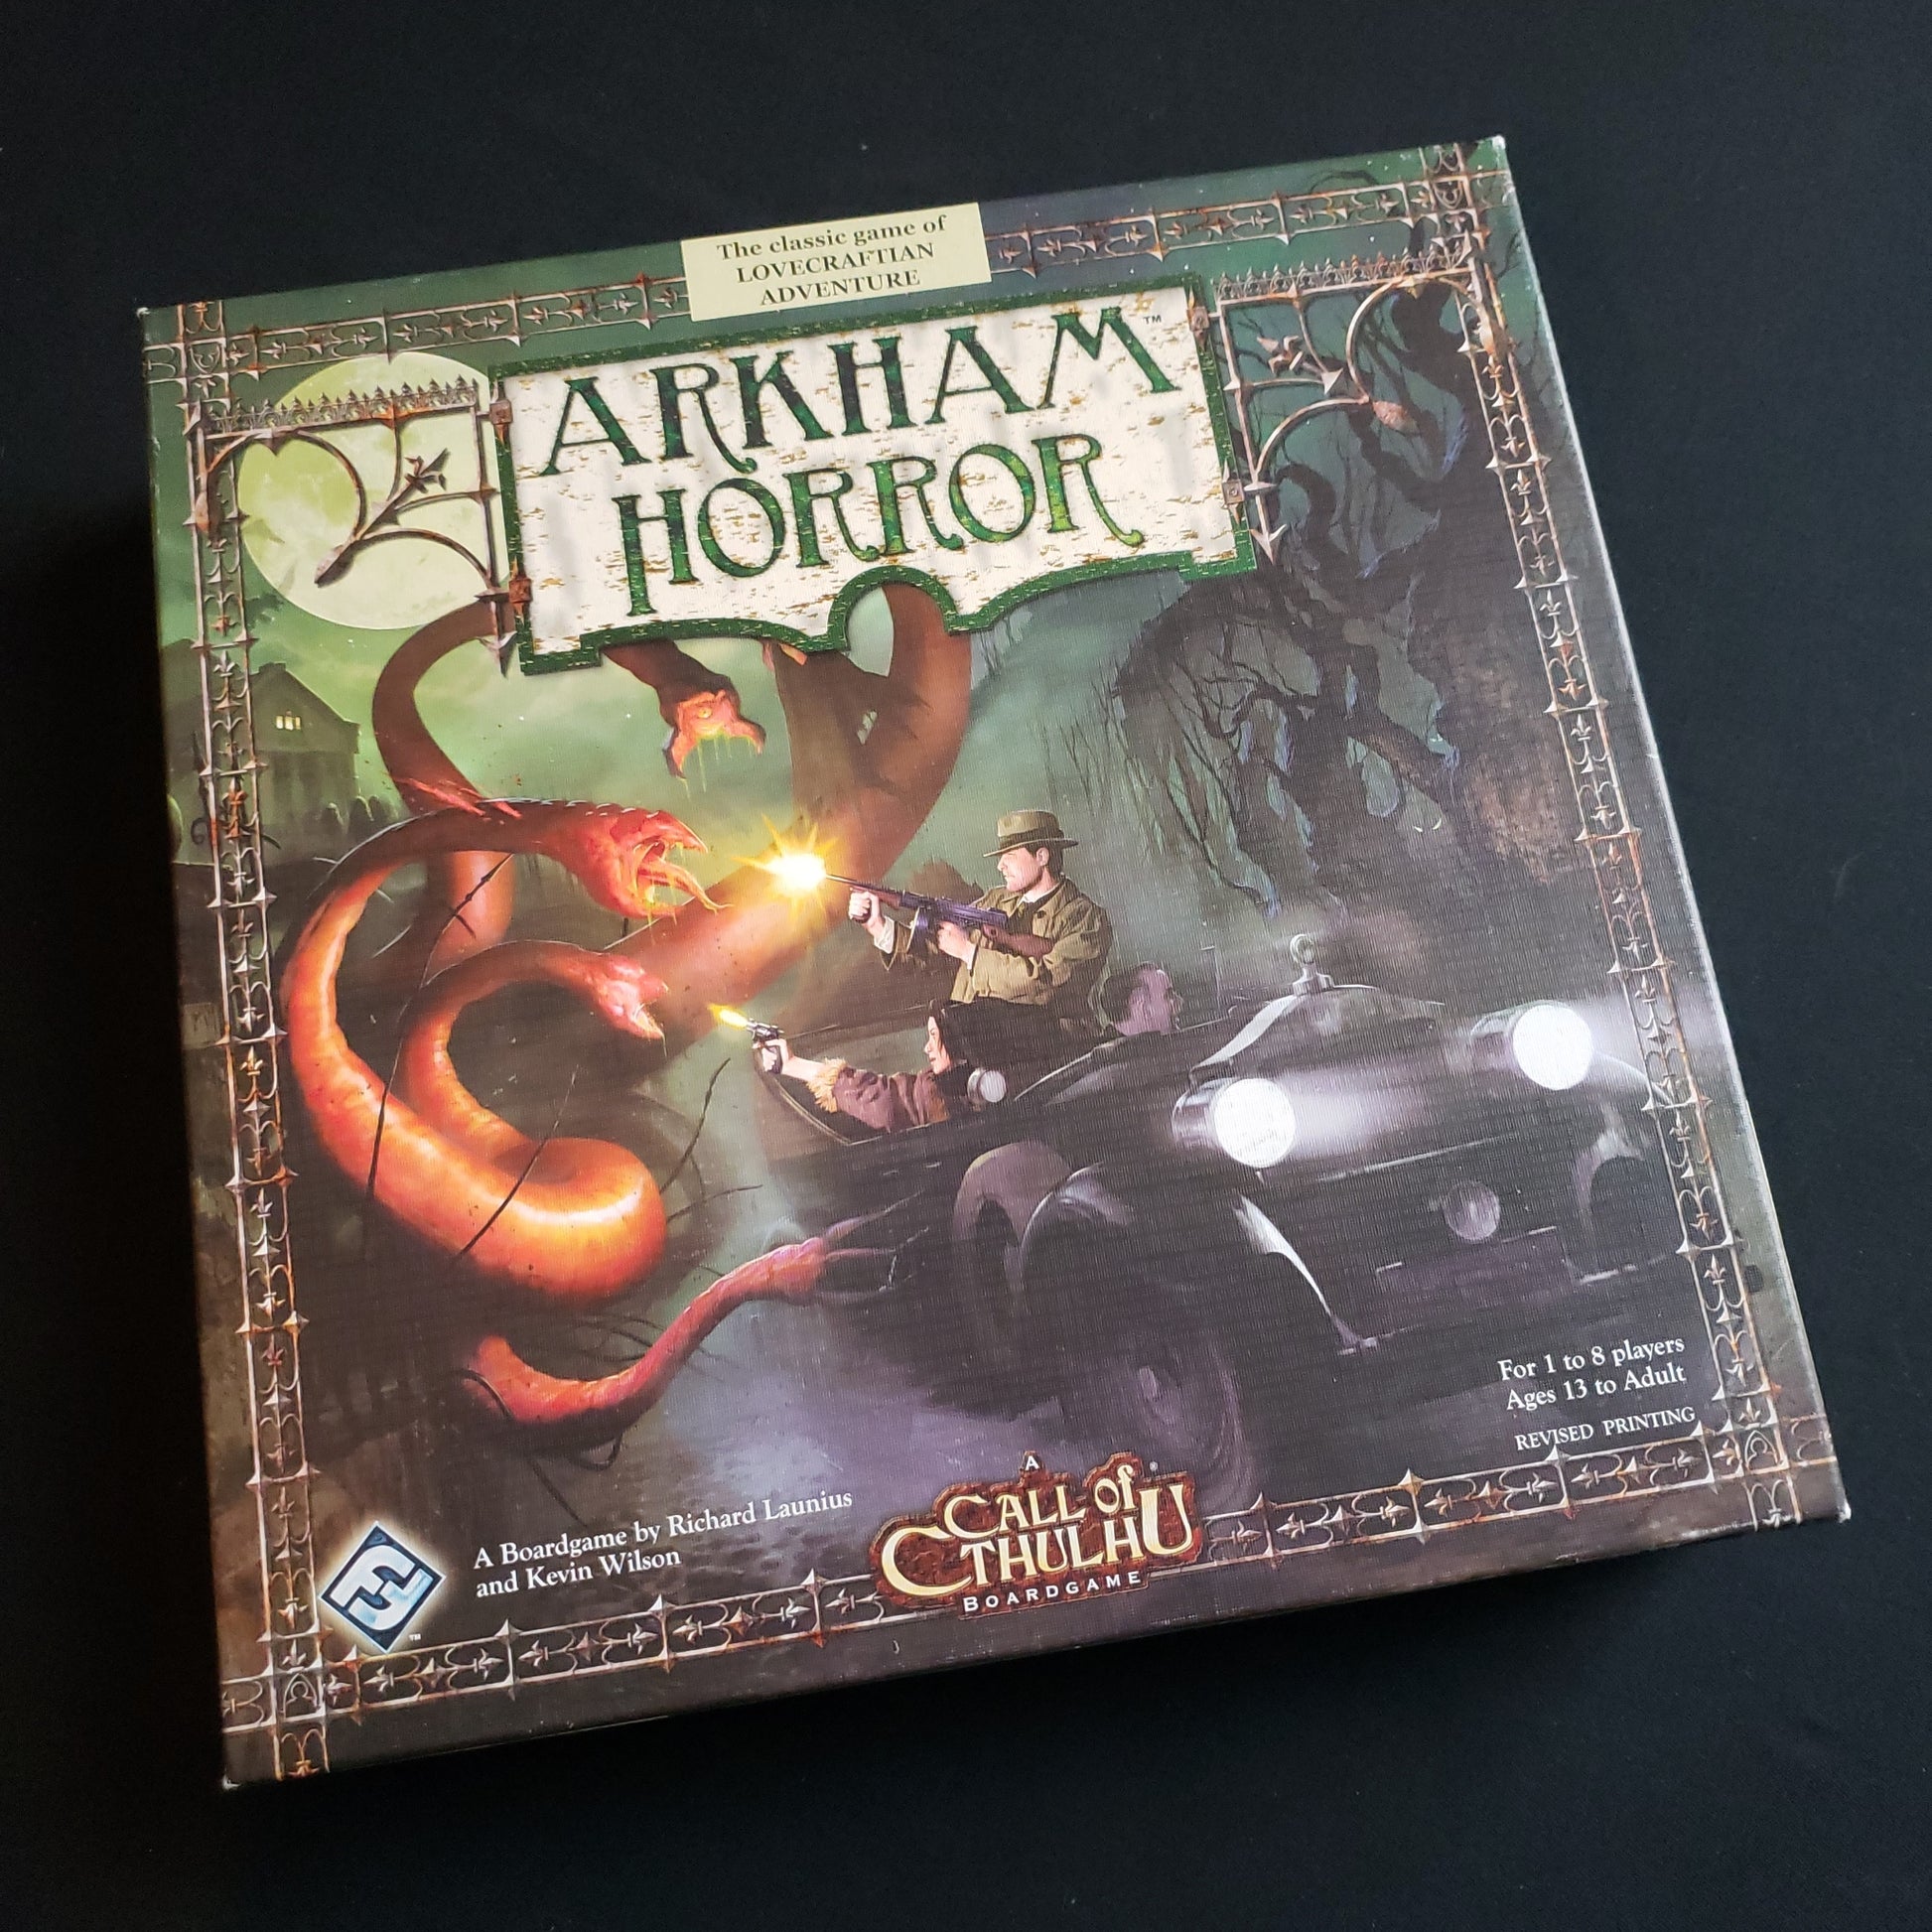 Image shows the front cover of the box of the Arkham Horror: Revised Second Edition board game